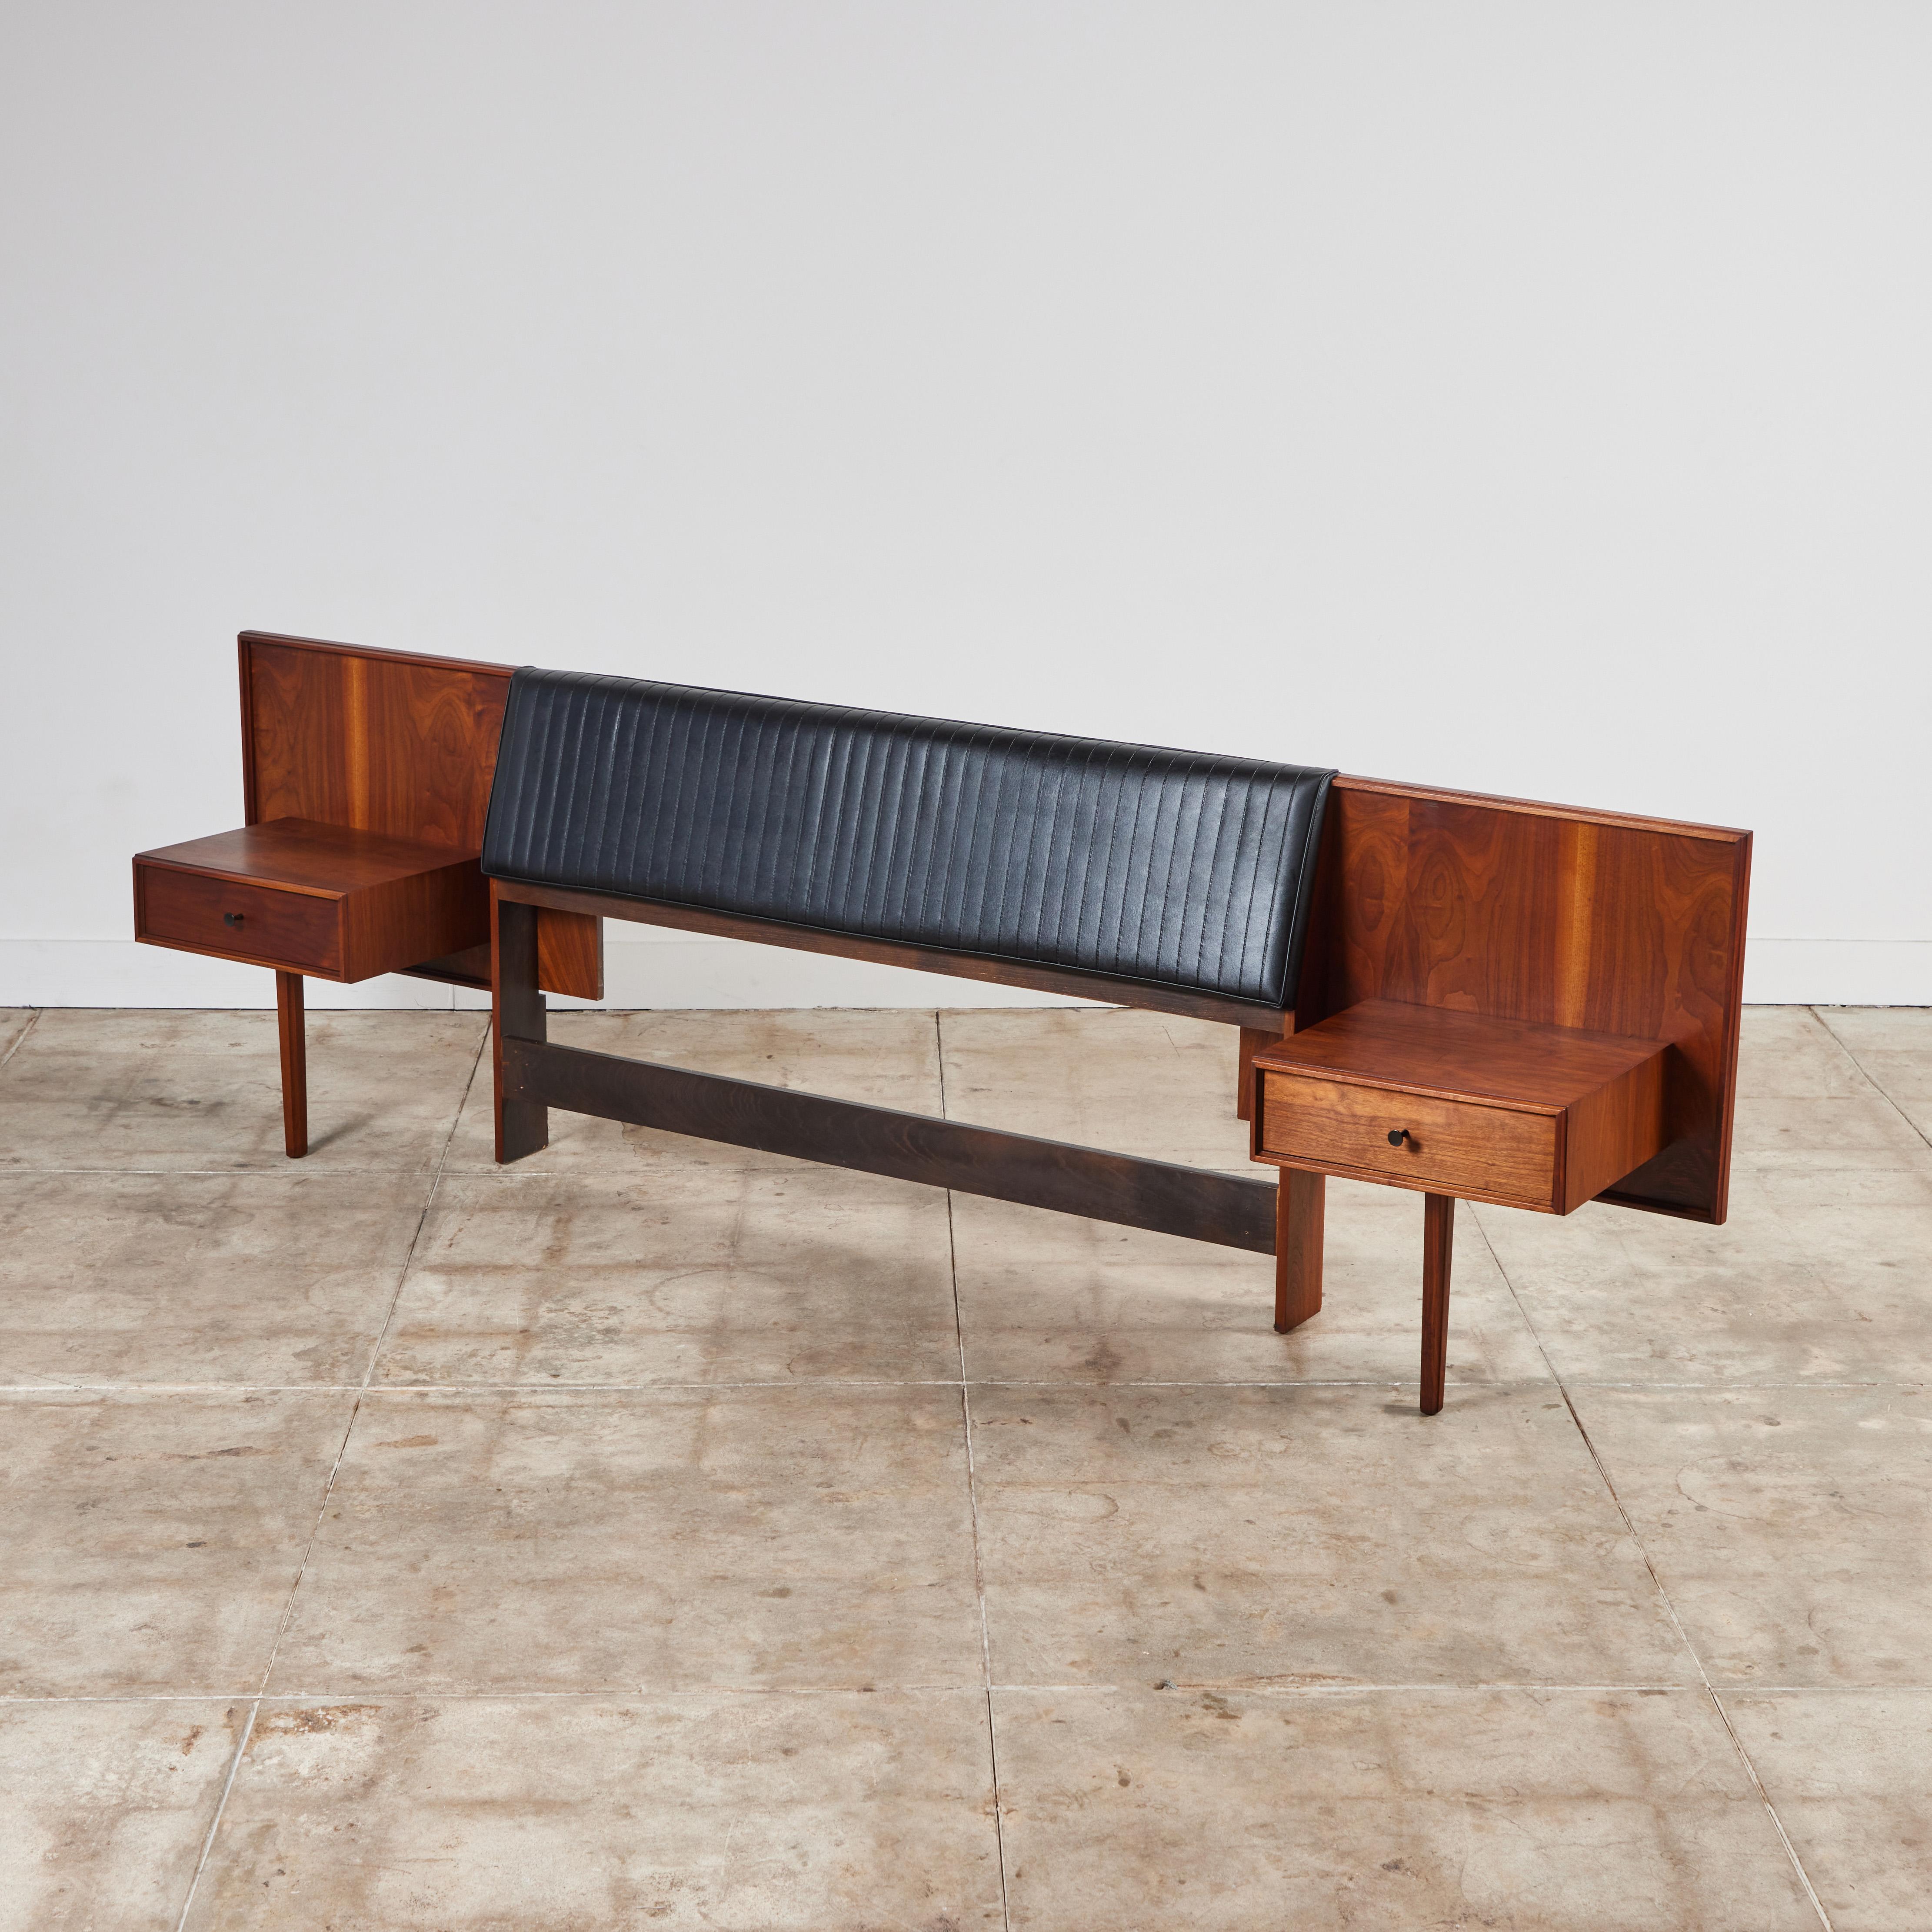 Queen size headboard by Robert Baron for Glenn of California c.1960s, USA. The walnut headboard features a vertical stitched leather headrest with attached night stands. Each night stand has one drawer with black enameled pulls.

Dimensions
118